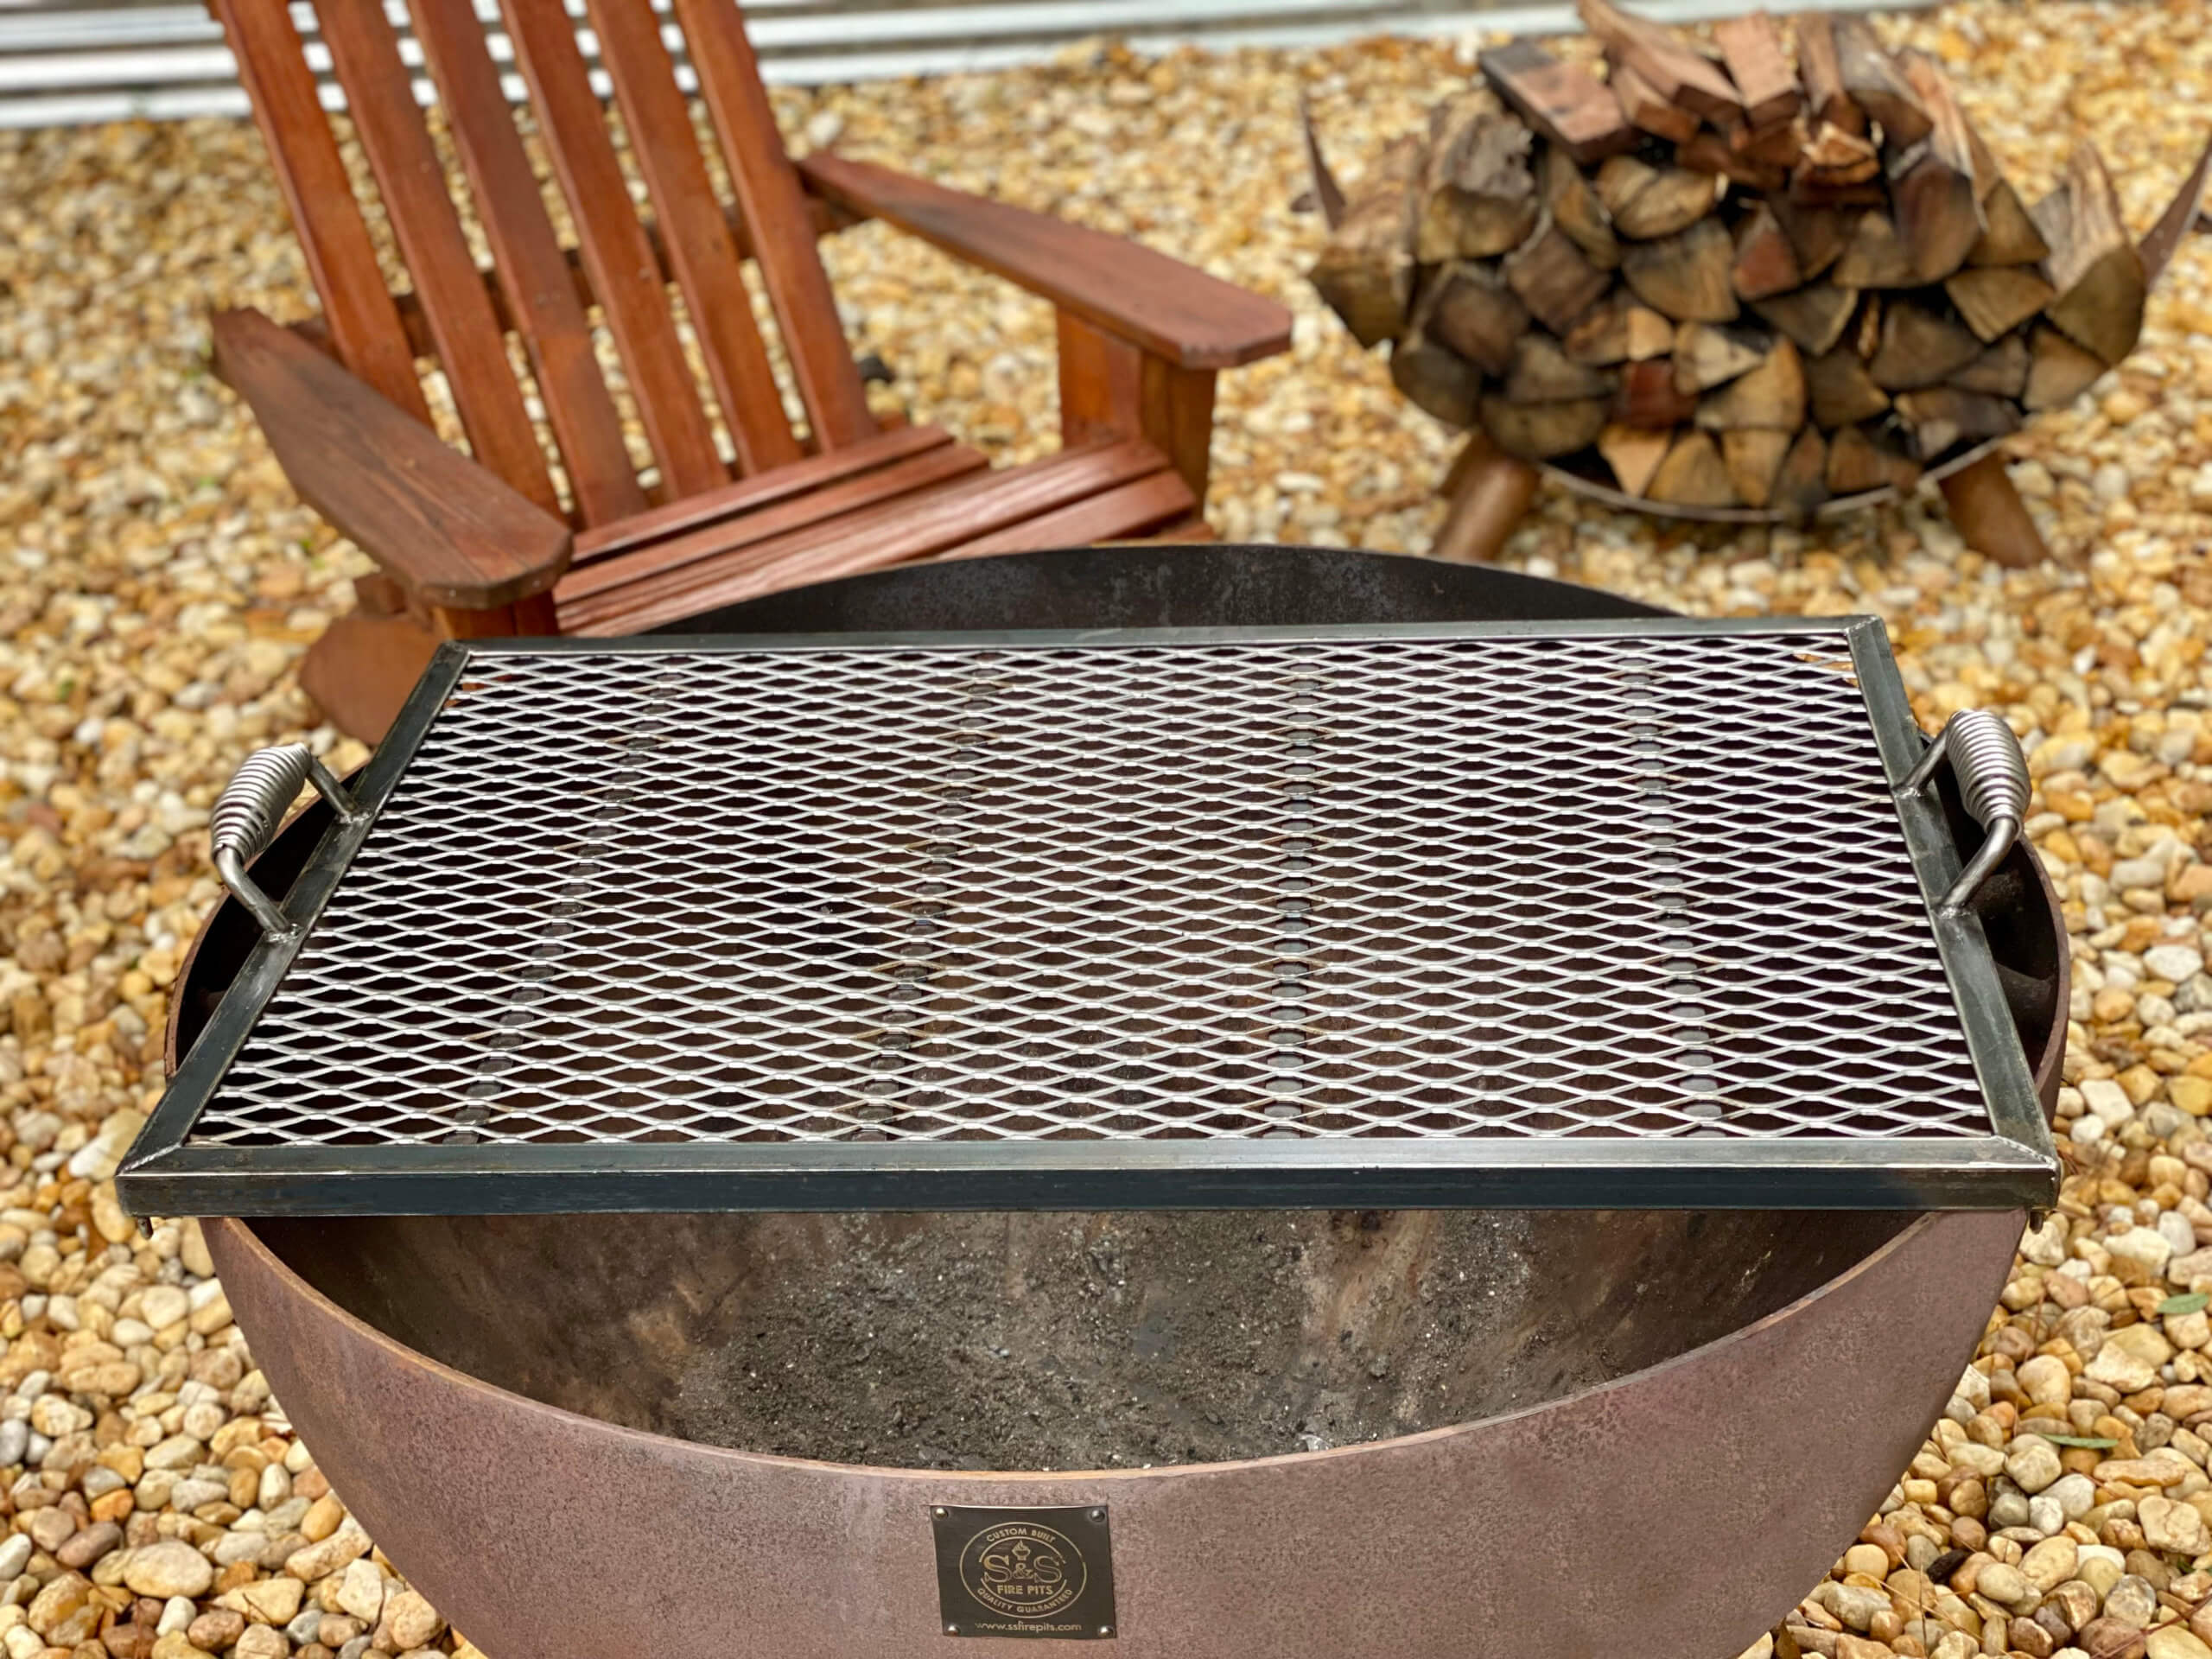 41 Heavy Duty Handcrafted Fire Pit, How To Make A Fire Pit Cooking Grate